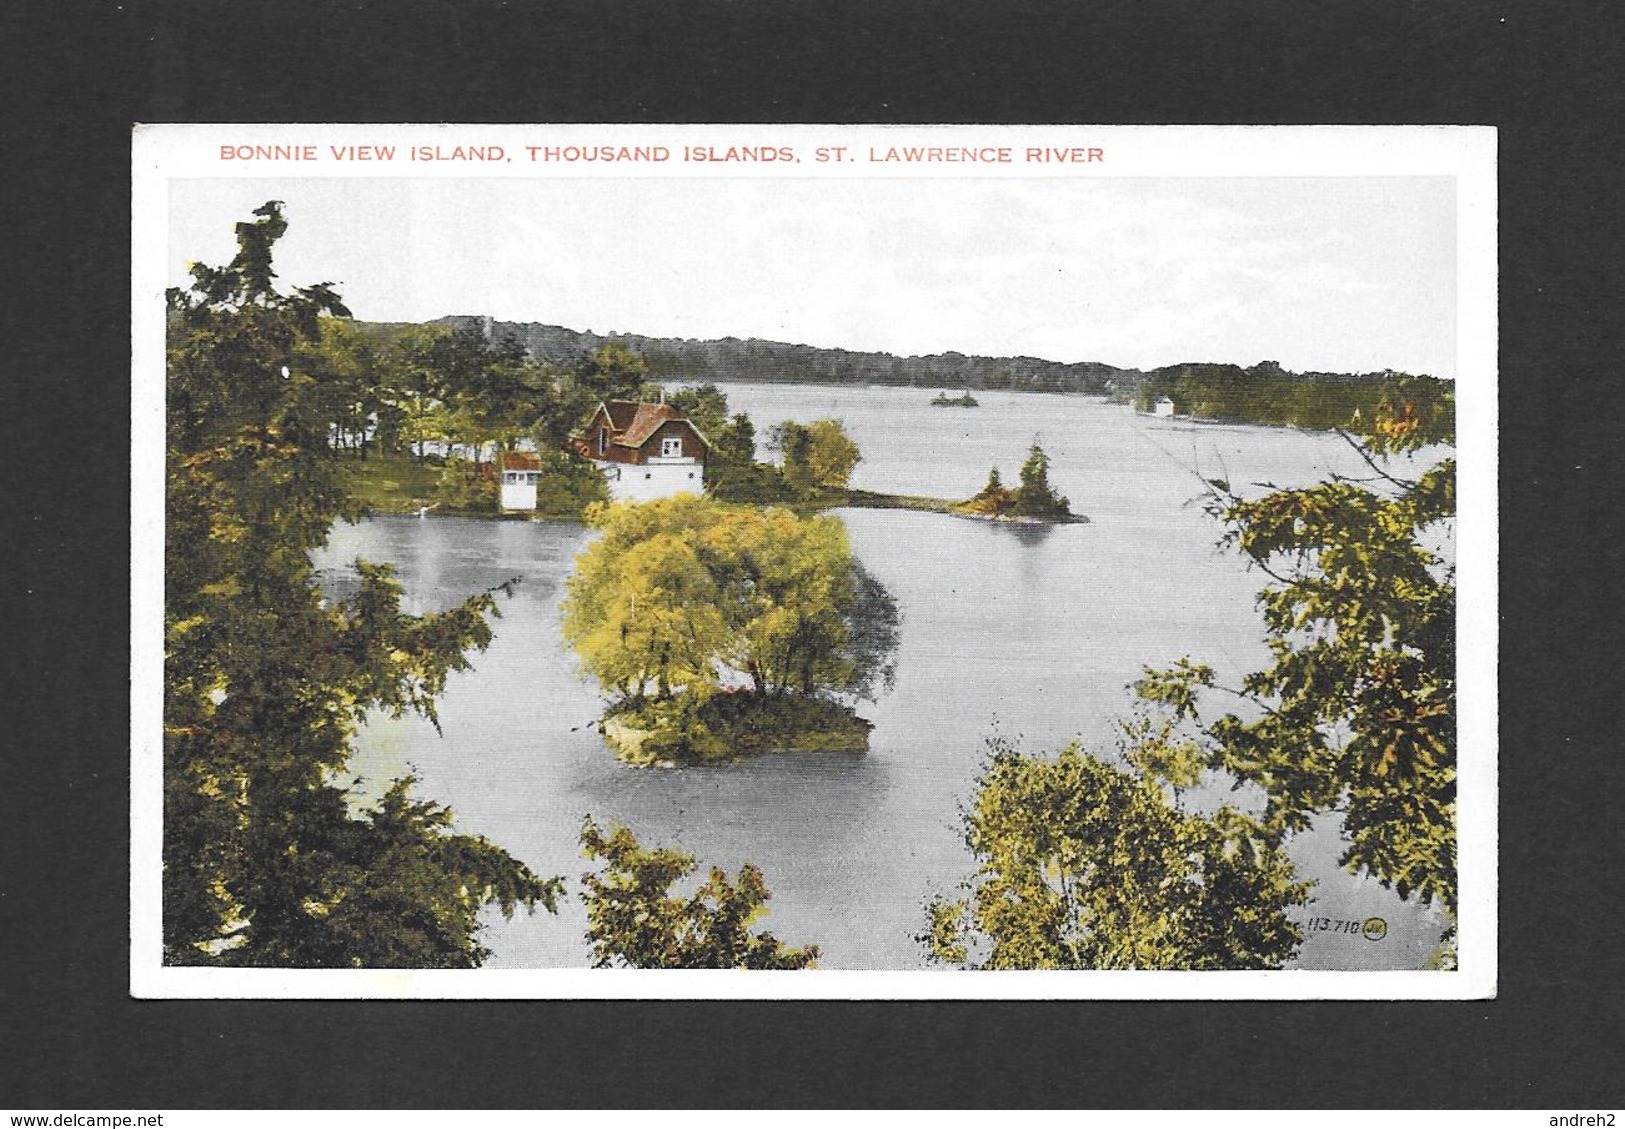 BONNIE VIEW ISLAND - THOUSAND ISLANDS - ONTARIO - ST LAWRENCE RIVER - BY VALENTINE BLACK - Thousand Islands